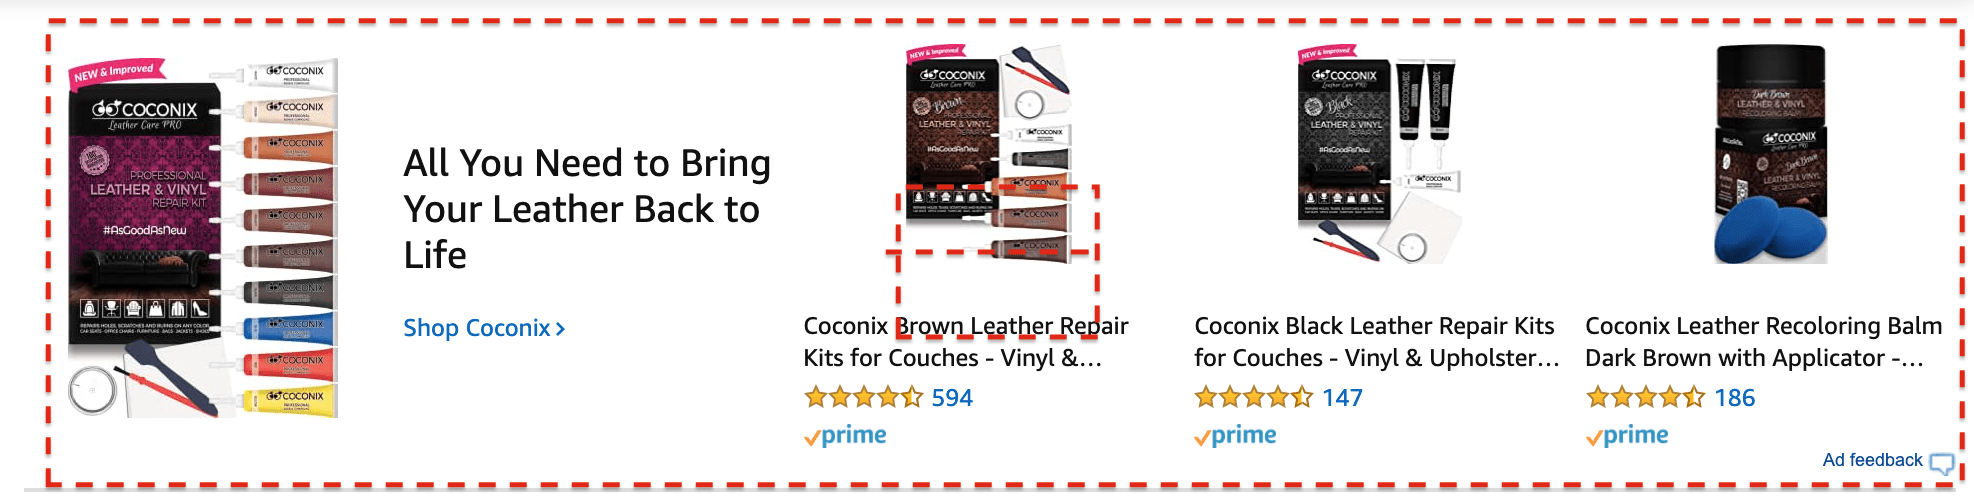 Amazon ads when searching for leather fix products